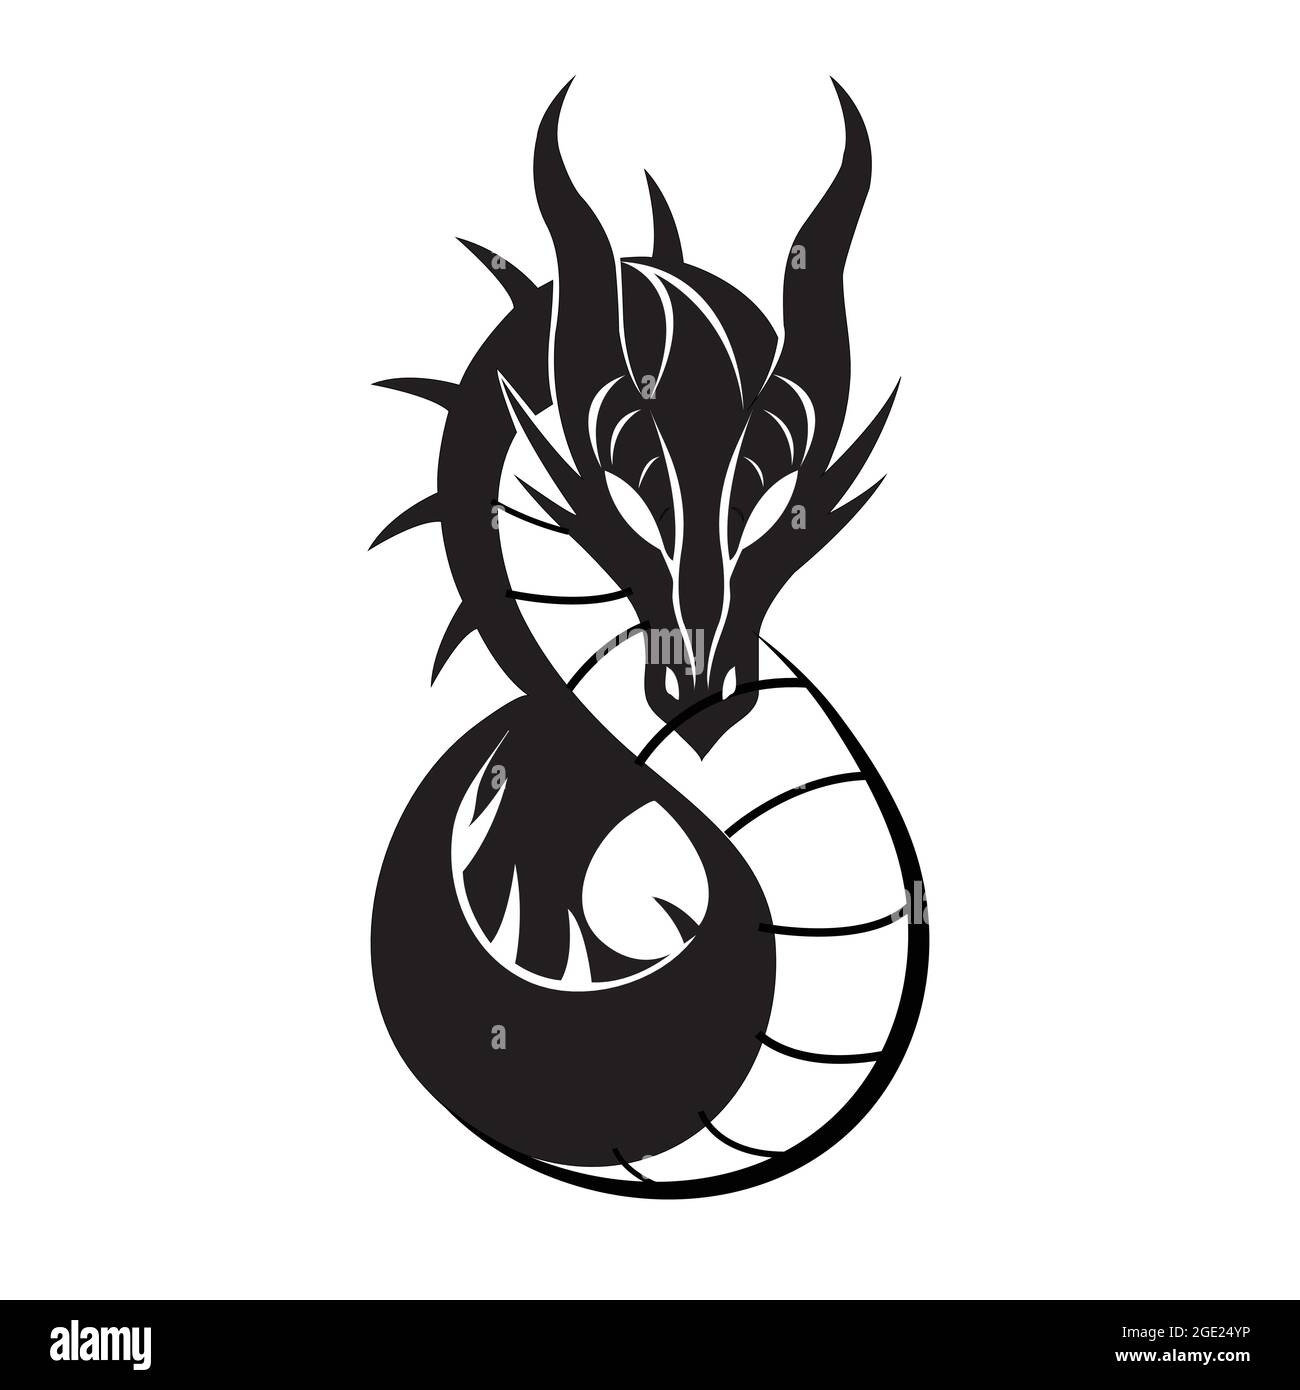 Tribal dragon tattoo vector illustration. Angry dragon, mythical creature icon. Stock Vector